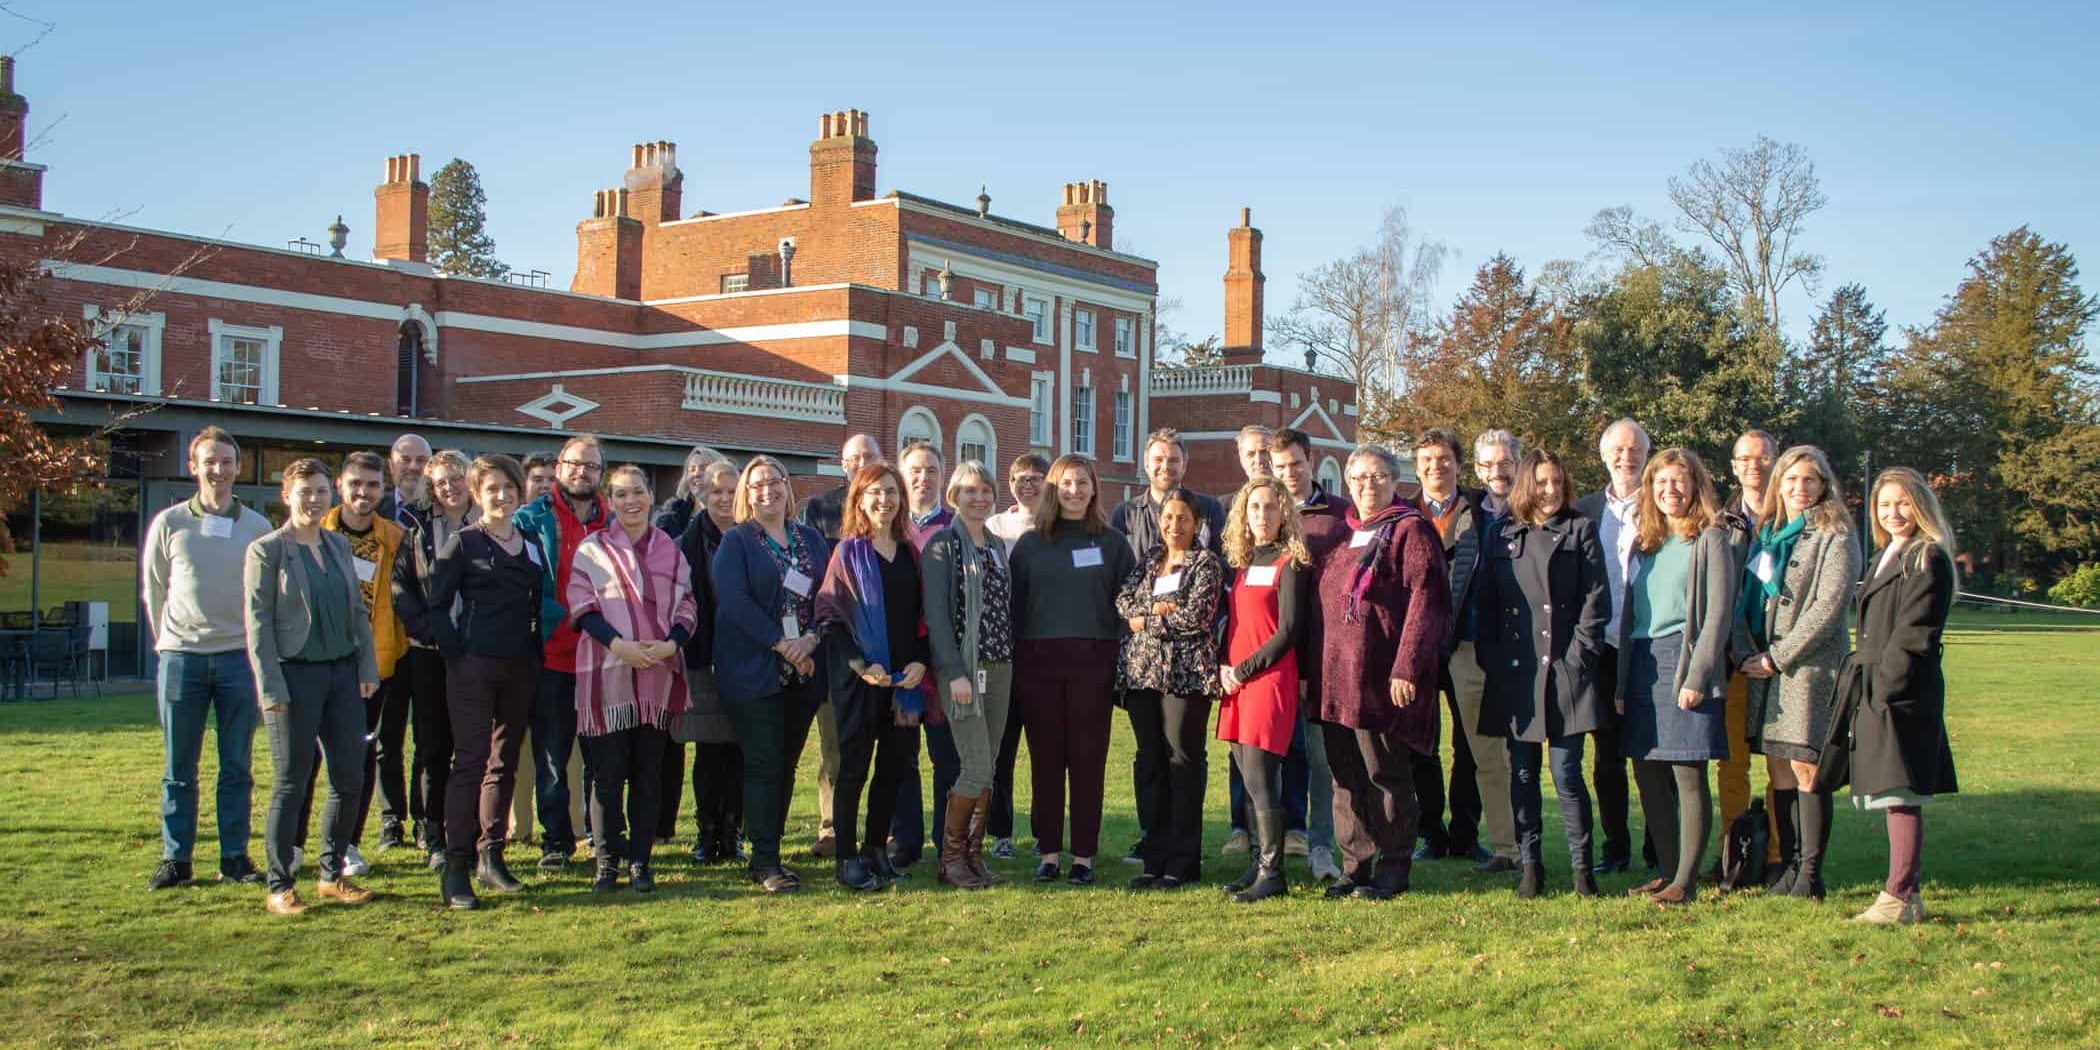 The 30 participants at the ASAPbio 2020 workshop in a group photo in front of Hinxton Hall